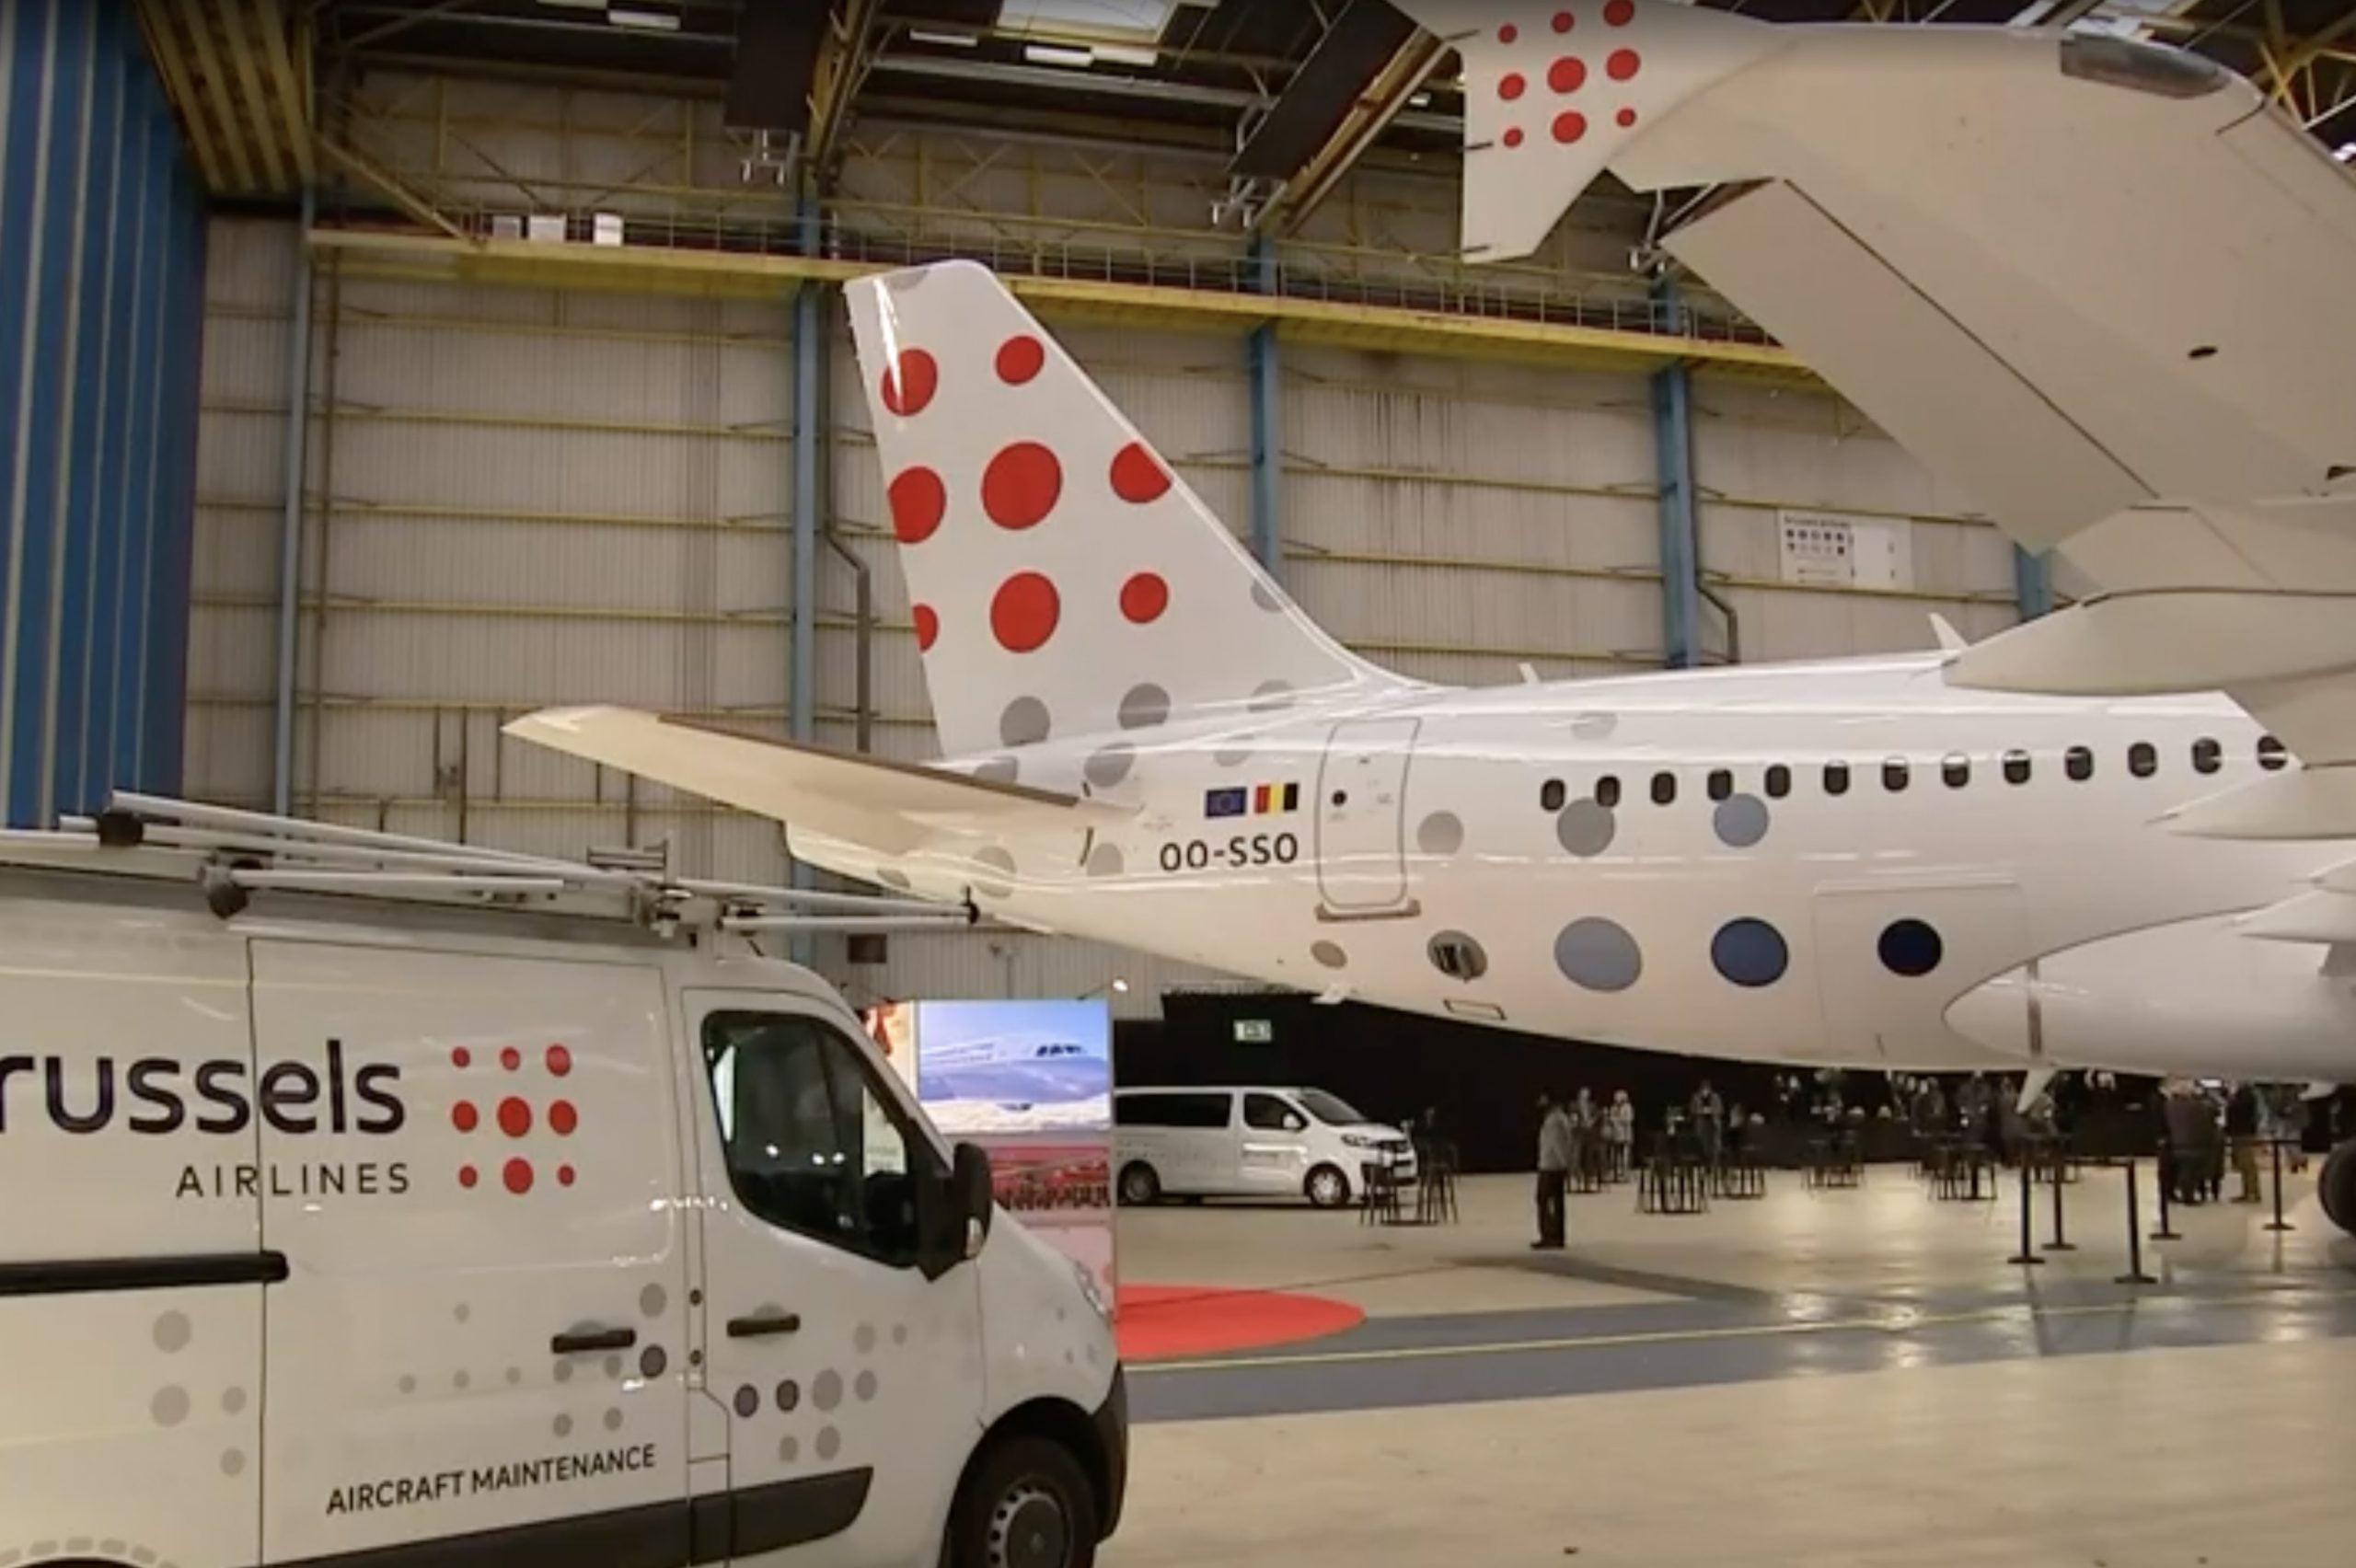 Brussels Airlines: no confusion possible about logo